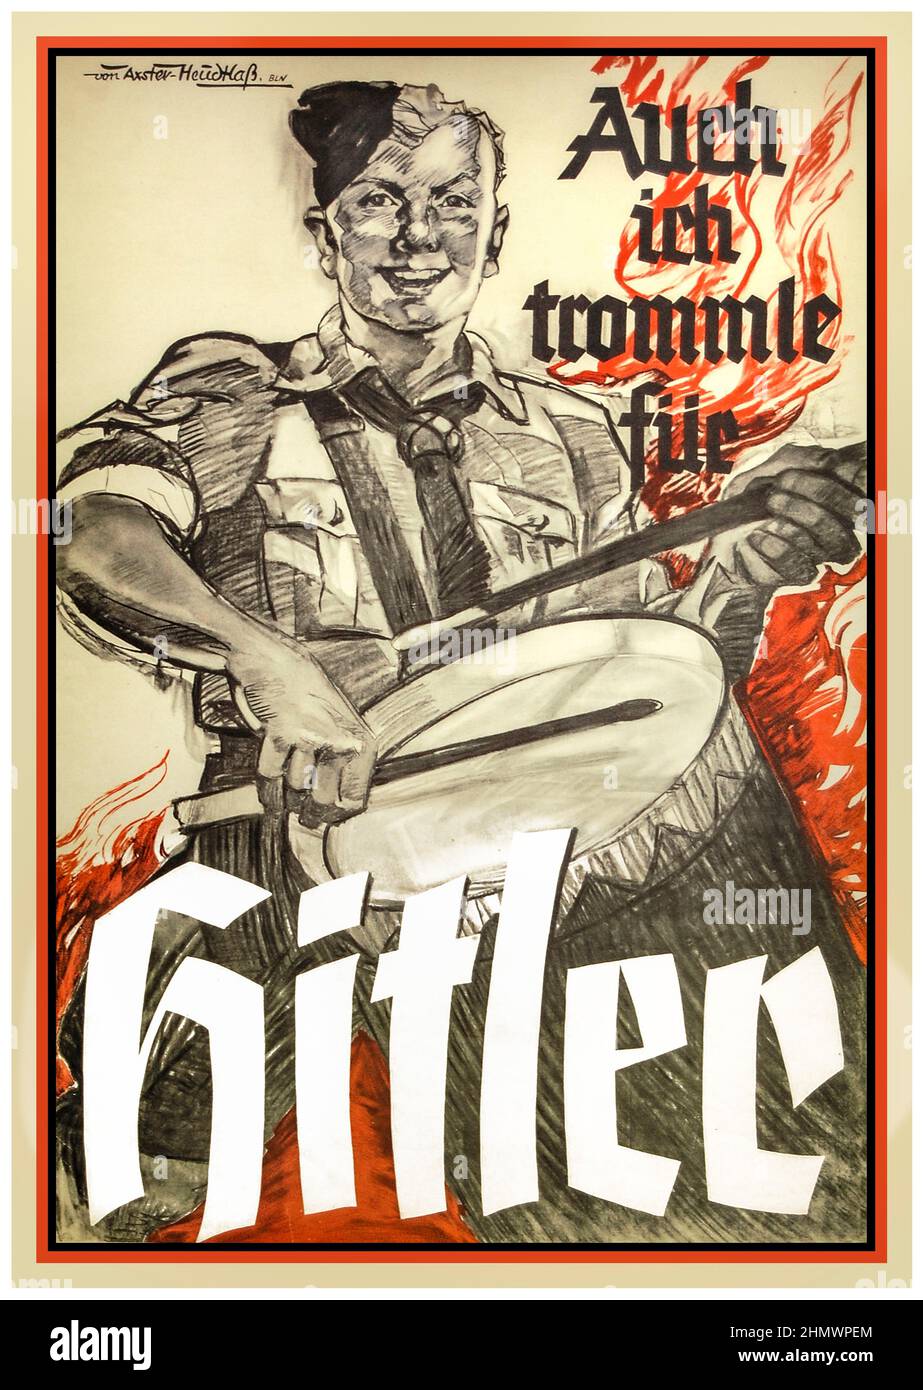 Nazi 1930s Propaganda Poster Hitler Youth Hitlerjugend 'Auch ich trommle fiir Hitler'  'I too drum for Hitler' Nazi Germany boy drummer Nazi Poster Illustration Lithograph Stock Photo